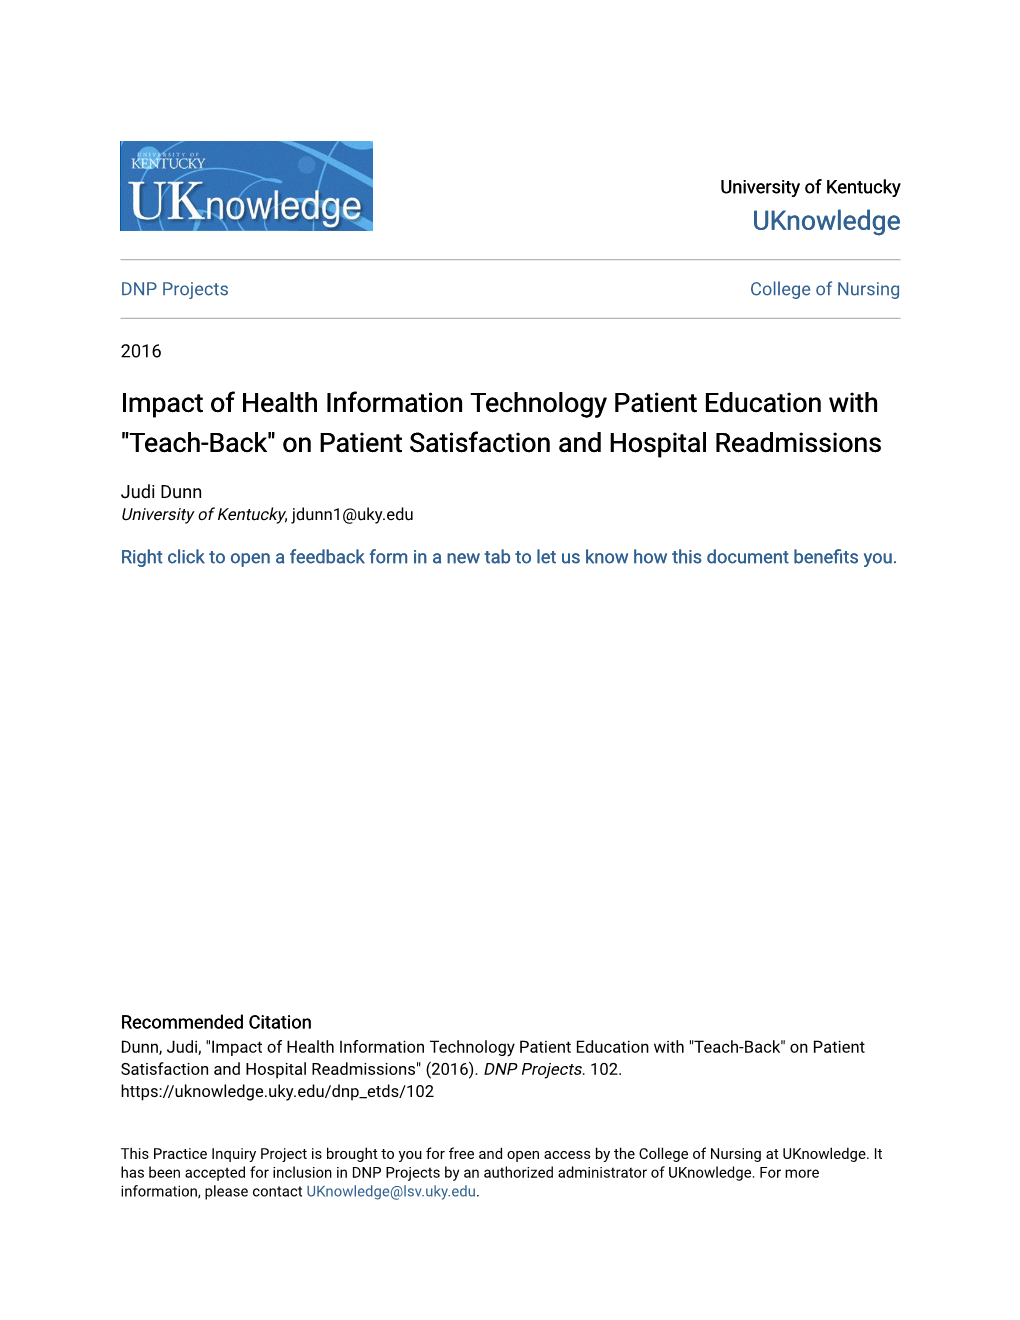 Impact of Health Information Technology Patient Education with "Teach-Back" on Patient Satisfaction and Hospital Readmissions